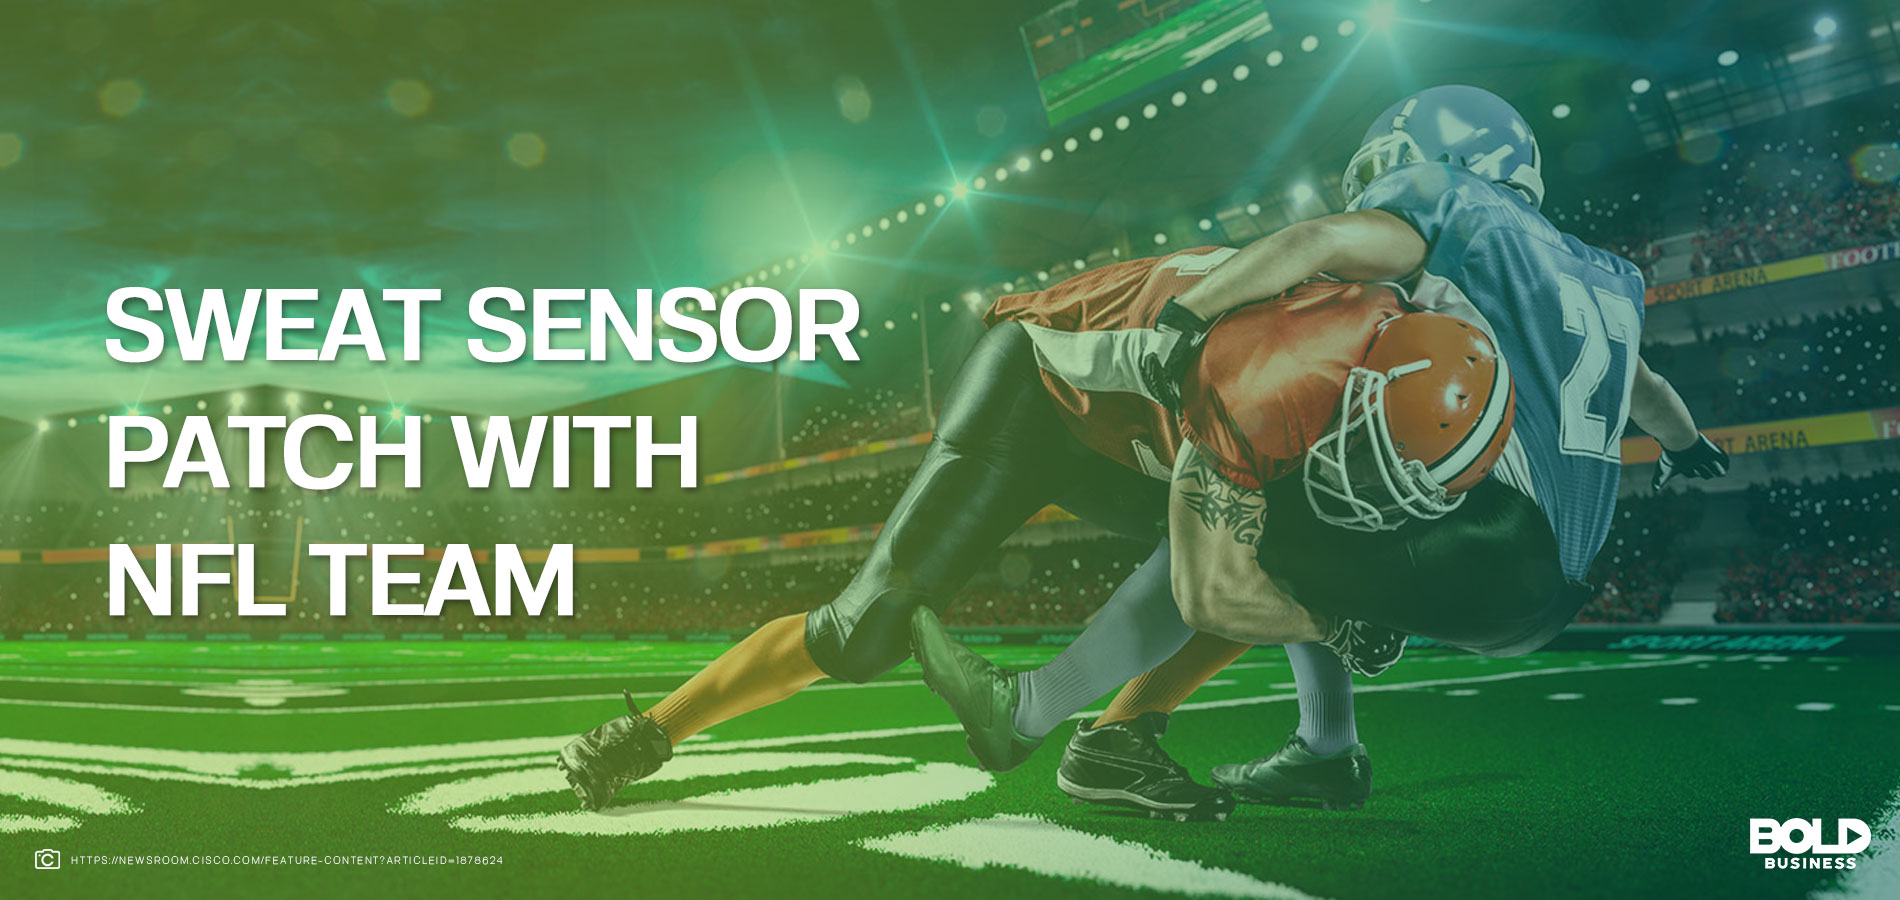 GraphWear Technologies is testing on NFL players their wearable sensor that analyzes sweat.